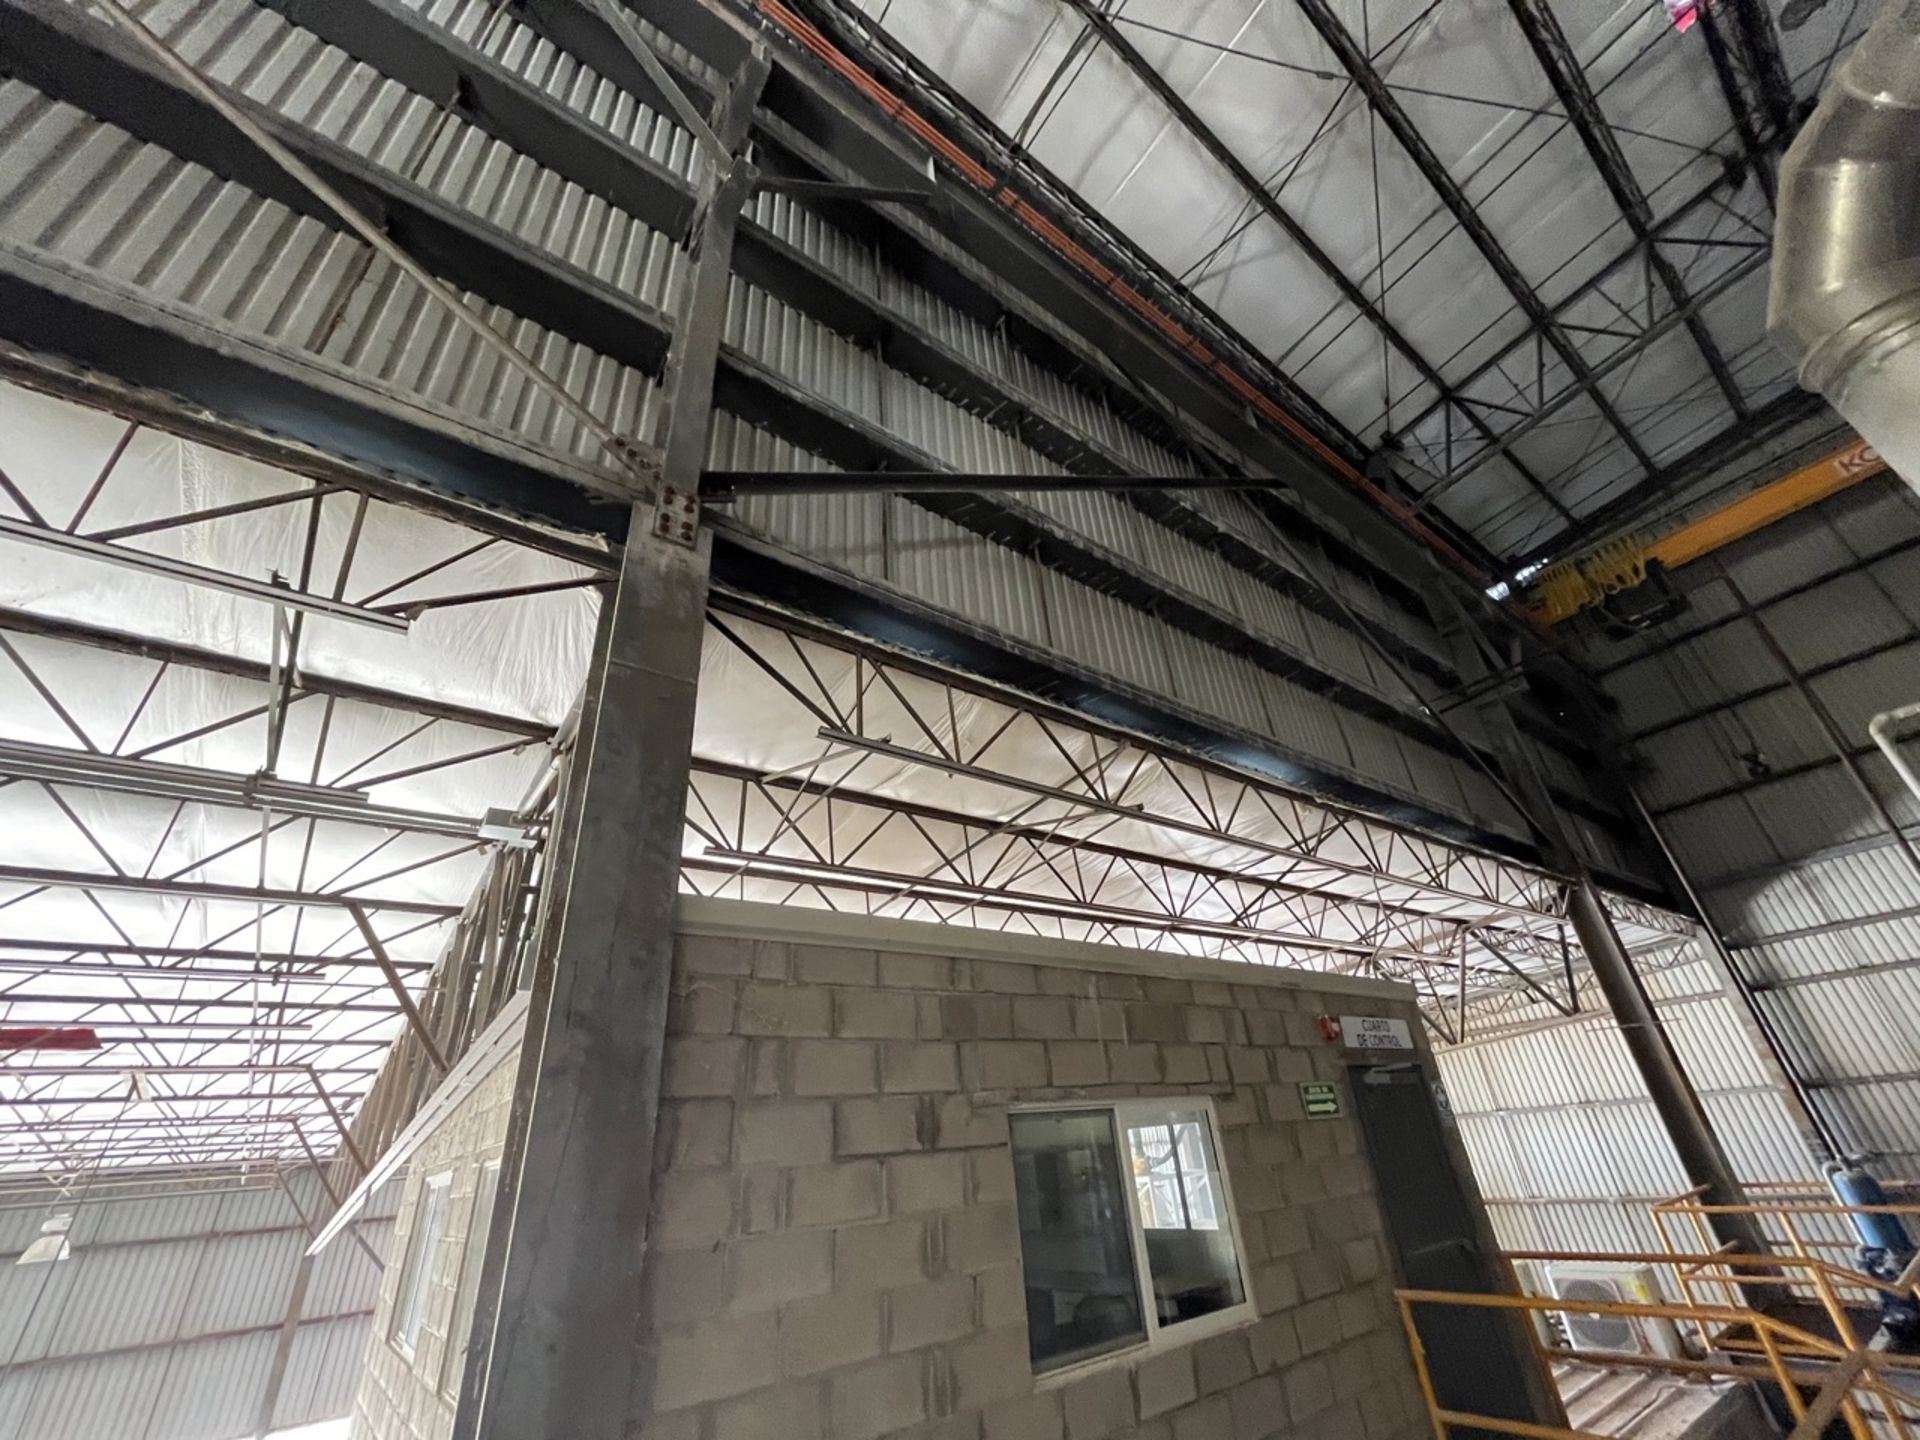 Complete Industrial Warehouse Structure - Image 125 of 141